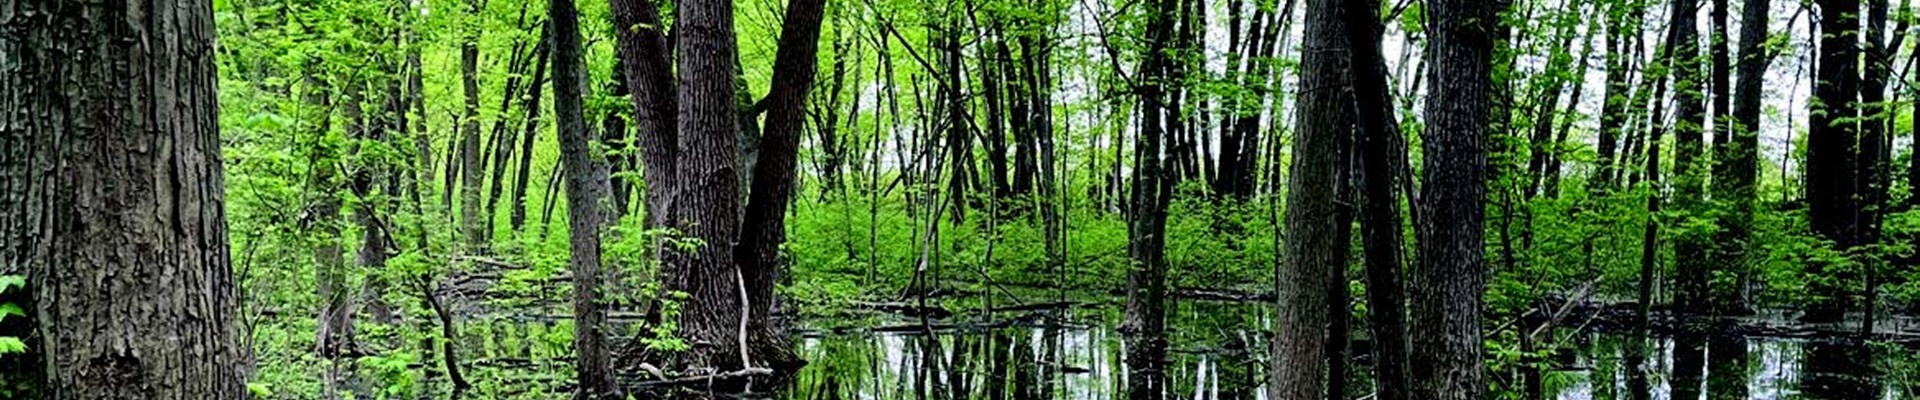 forest with vernal pools